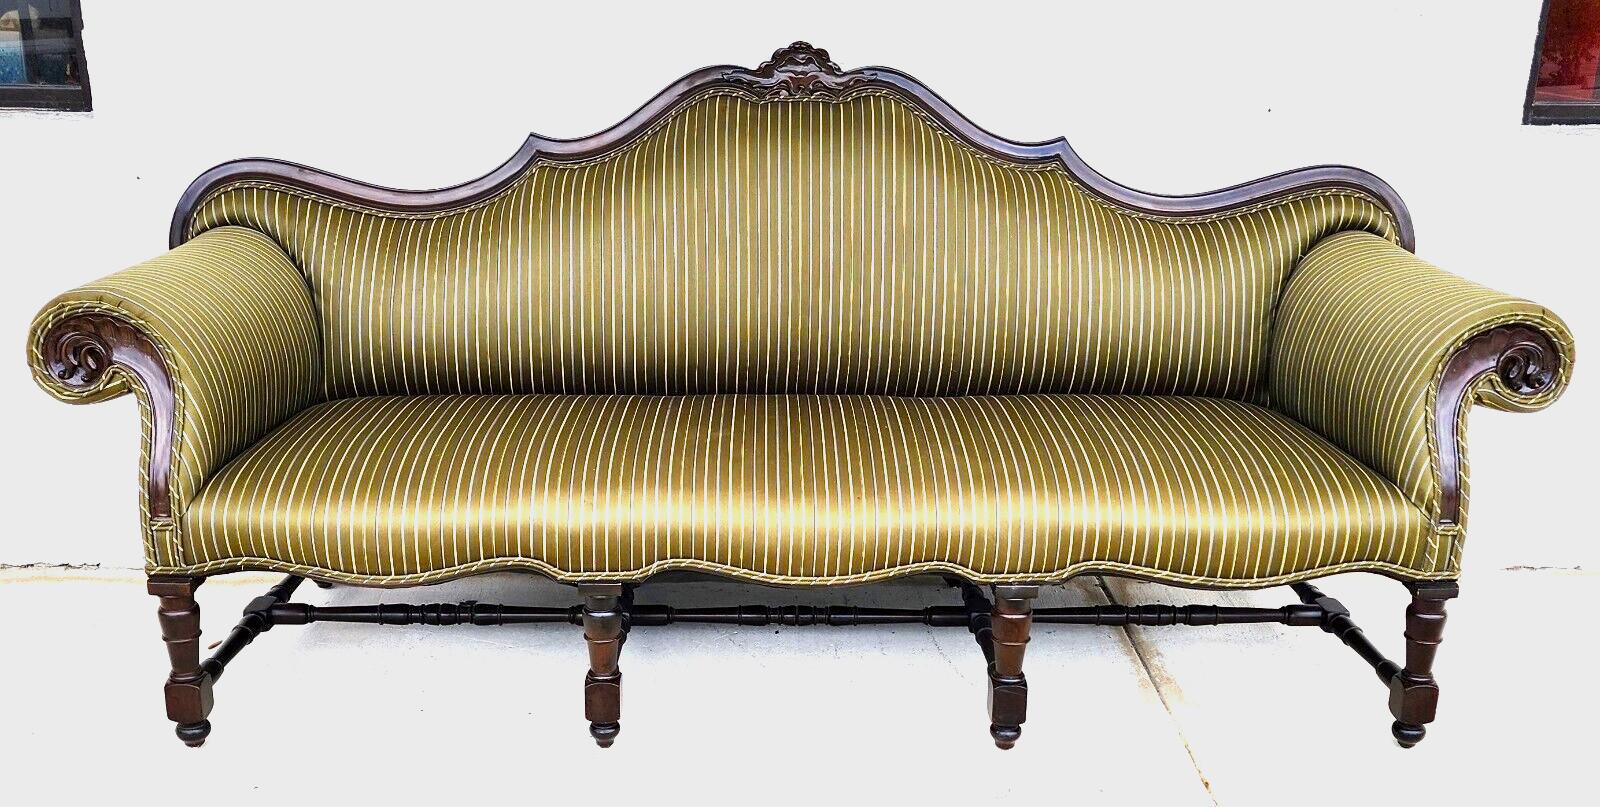 For FULL item description click on CONTINUE READING at the bottom of this page.

Offering One Of Our Recent Palm Beach Estate Fine Furniture Acquisitions Of A
Mid-Century French Style Sofa
It looks to have been completely redone inside and